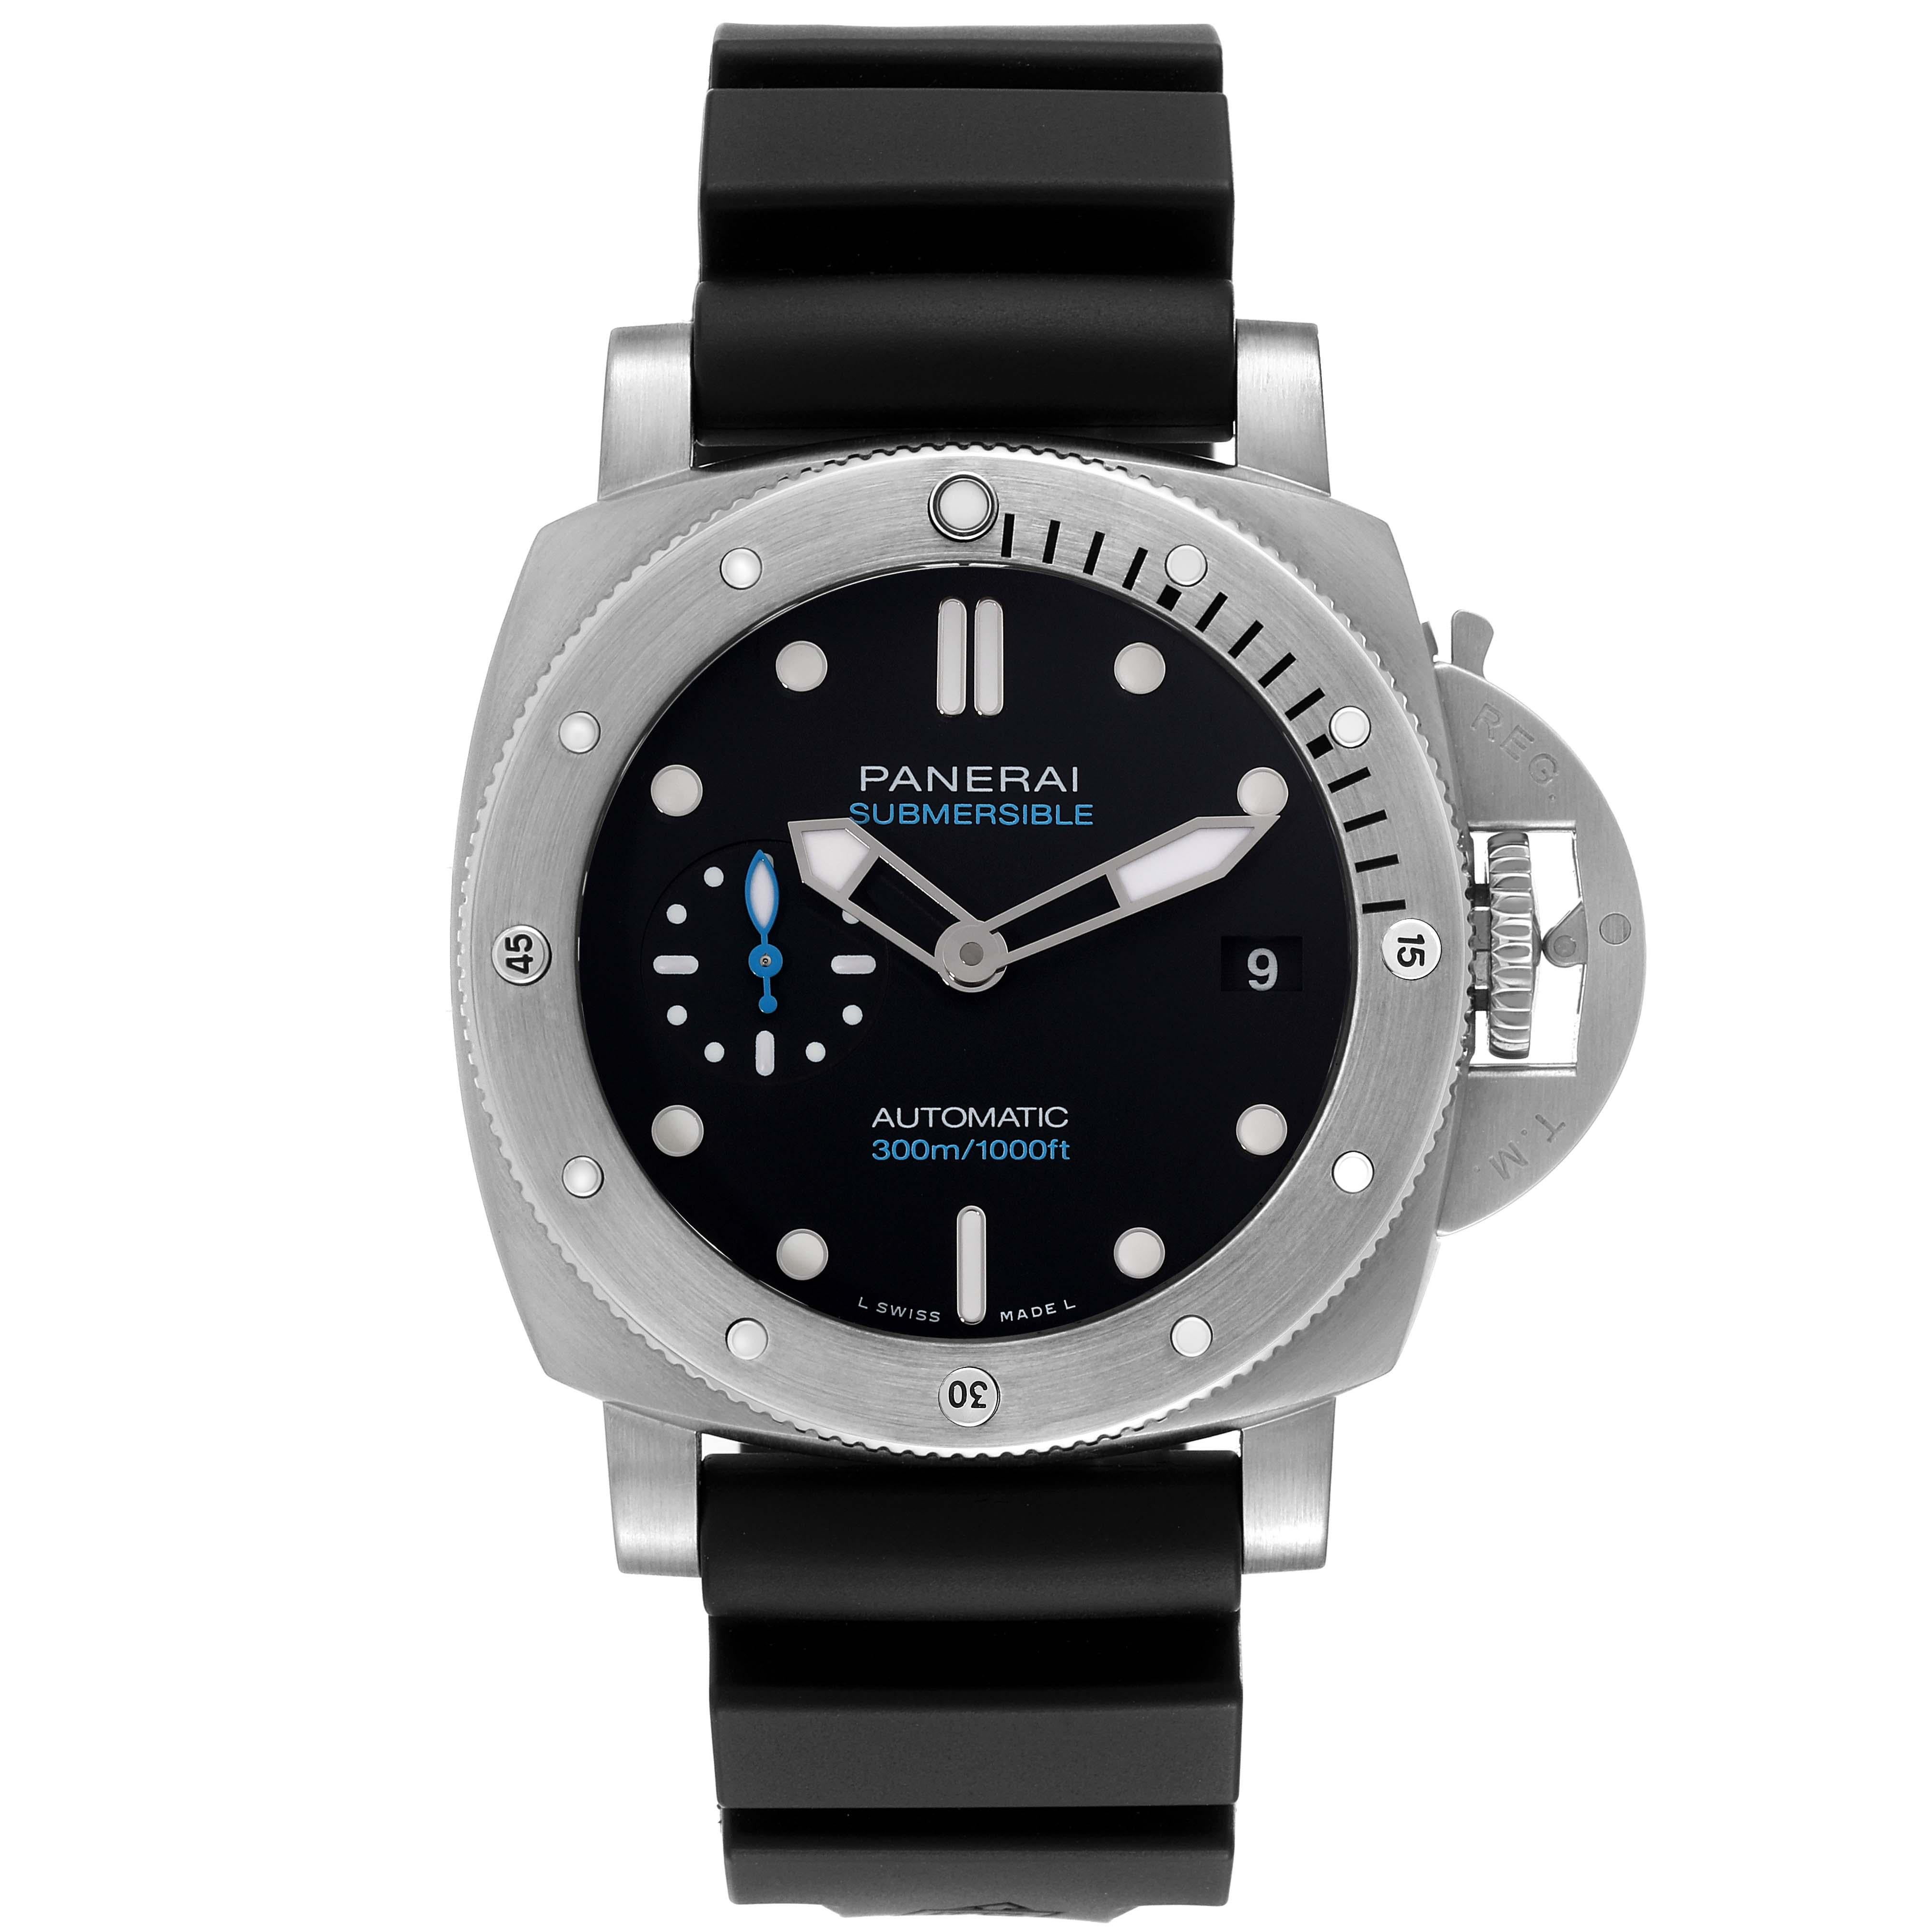 Panerai Luminor Submersible 42mm Black Dial Steel Mens Watch PAM00973. Automatic self-winding movement. Two part cushion shaped stainless steel case 42.0 mm in diameter. Panerai patented crown protector. Stainless steel unidirectional rotating bezel